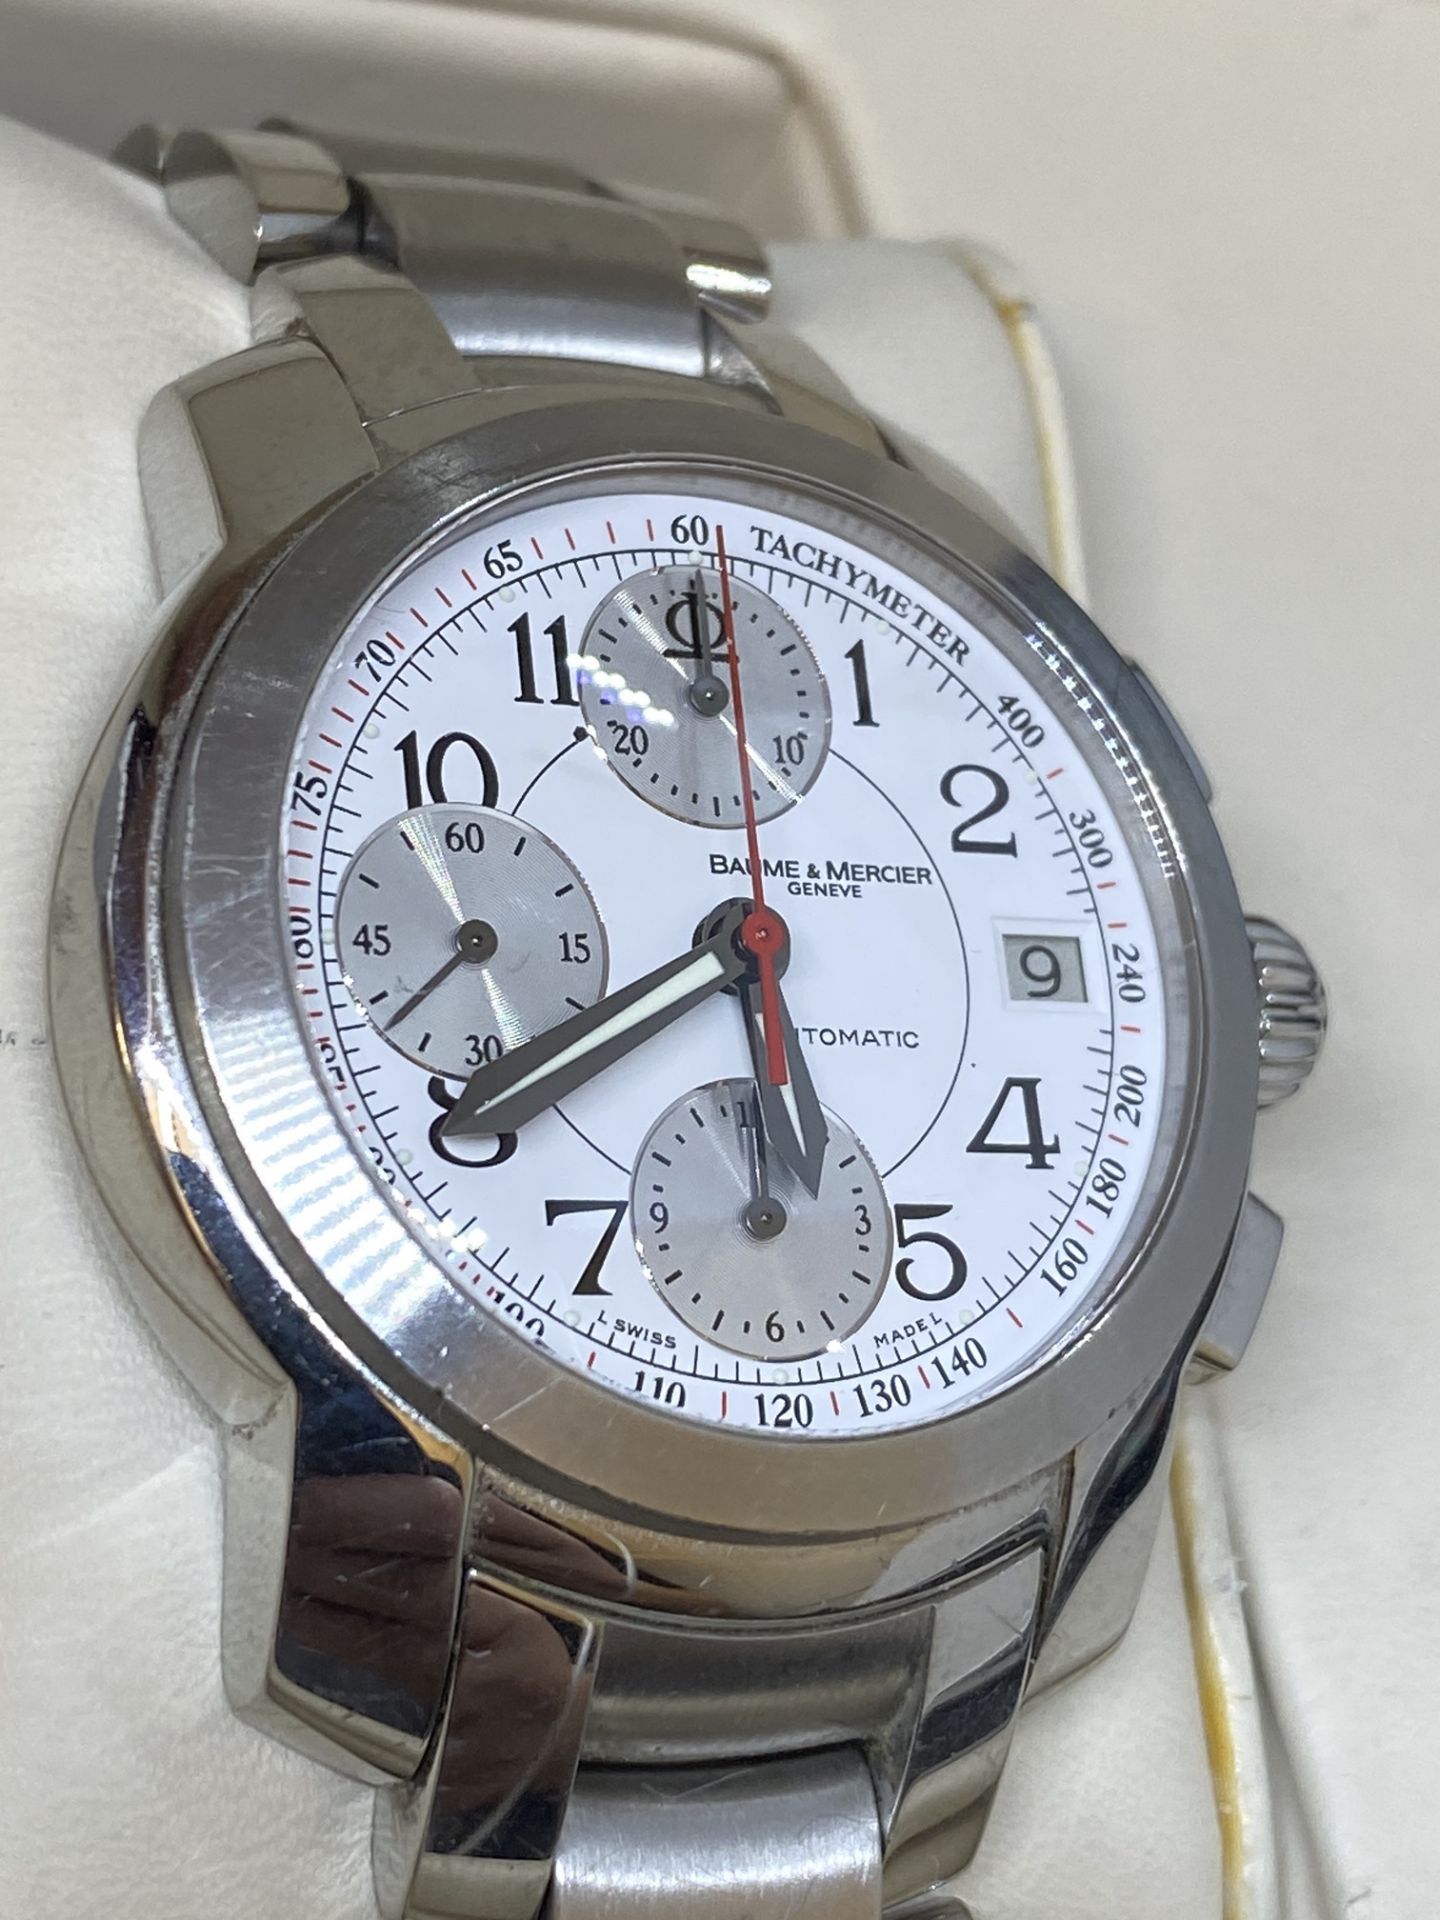 BAUME & MERCIER AUTOMATIC STAINLESS STEEL CHRONO WATCH